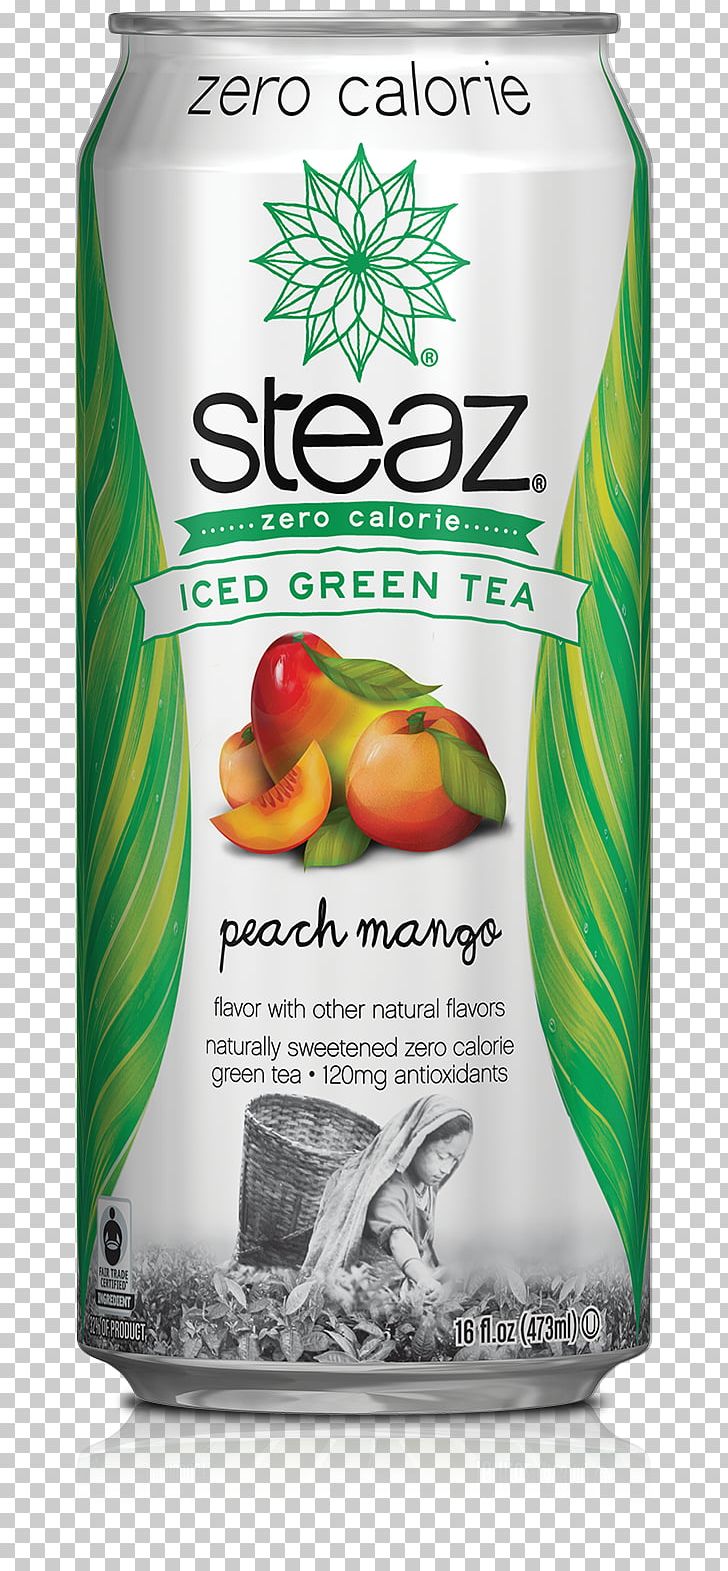 Iced Tea Green Tea Organic Food Steaz PNG, Clipart, Berry, Beverages, Blackberry, Brisk, Calorie Free PNG Download